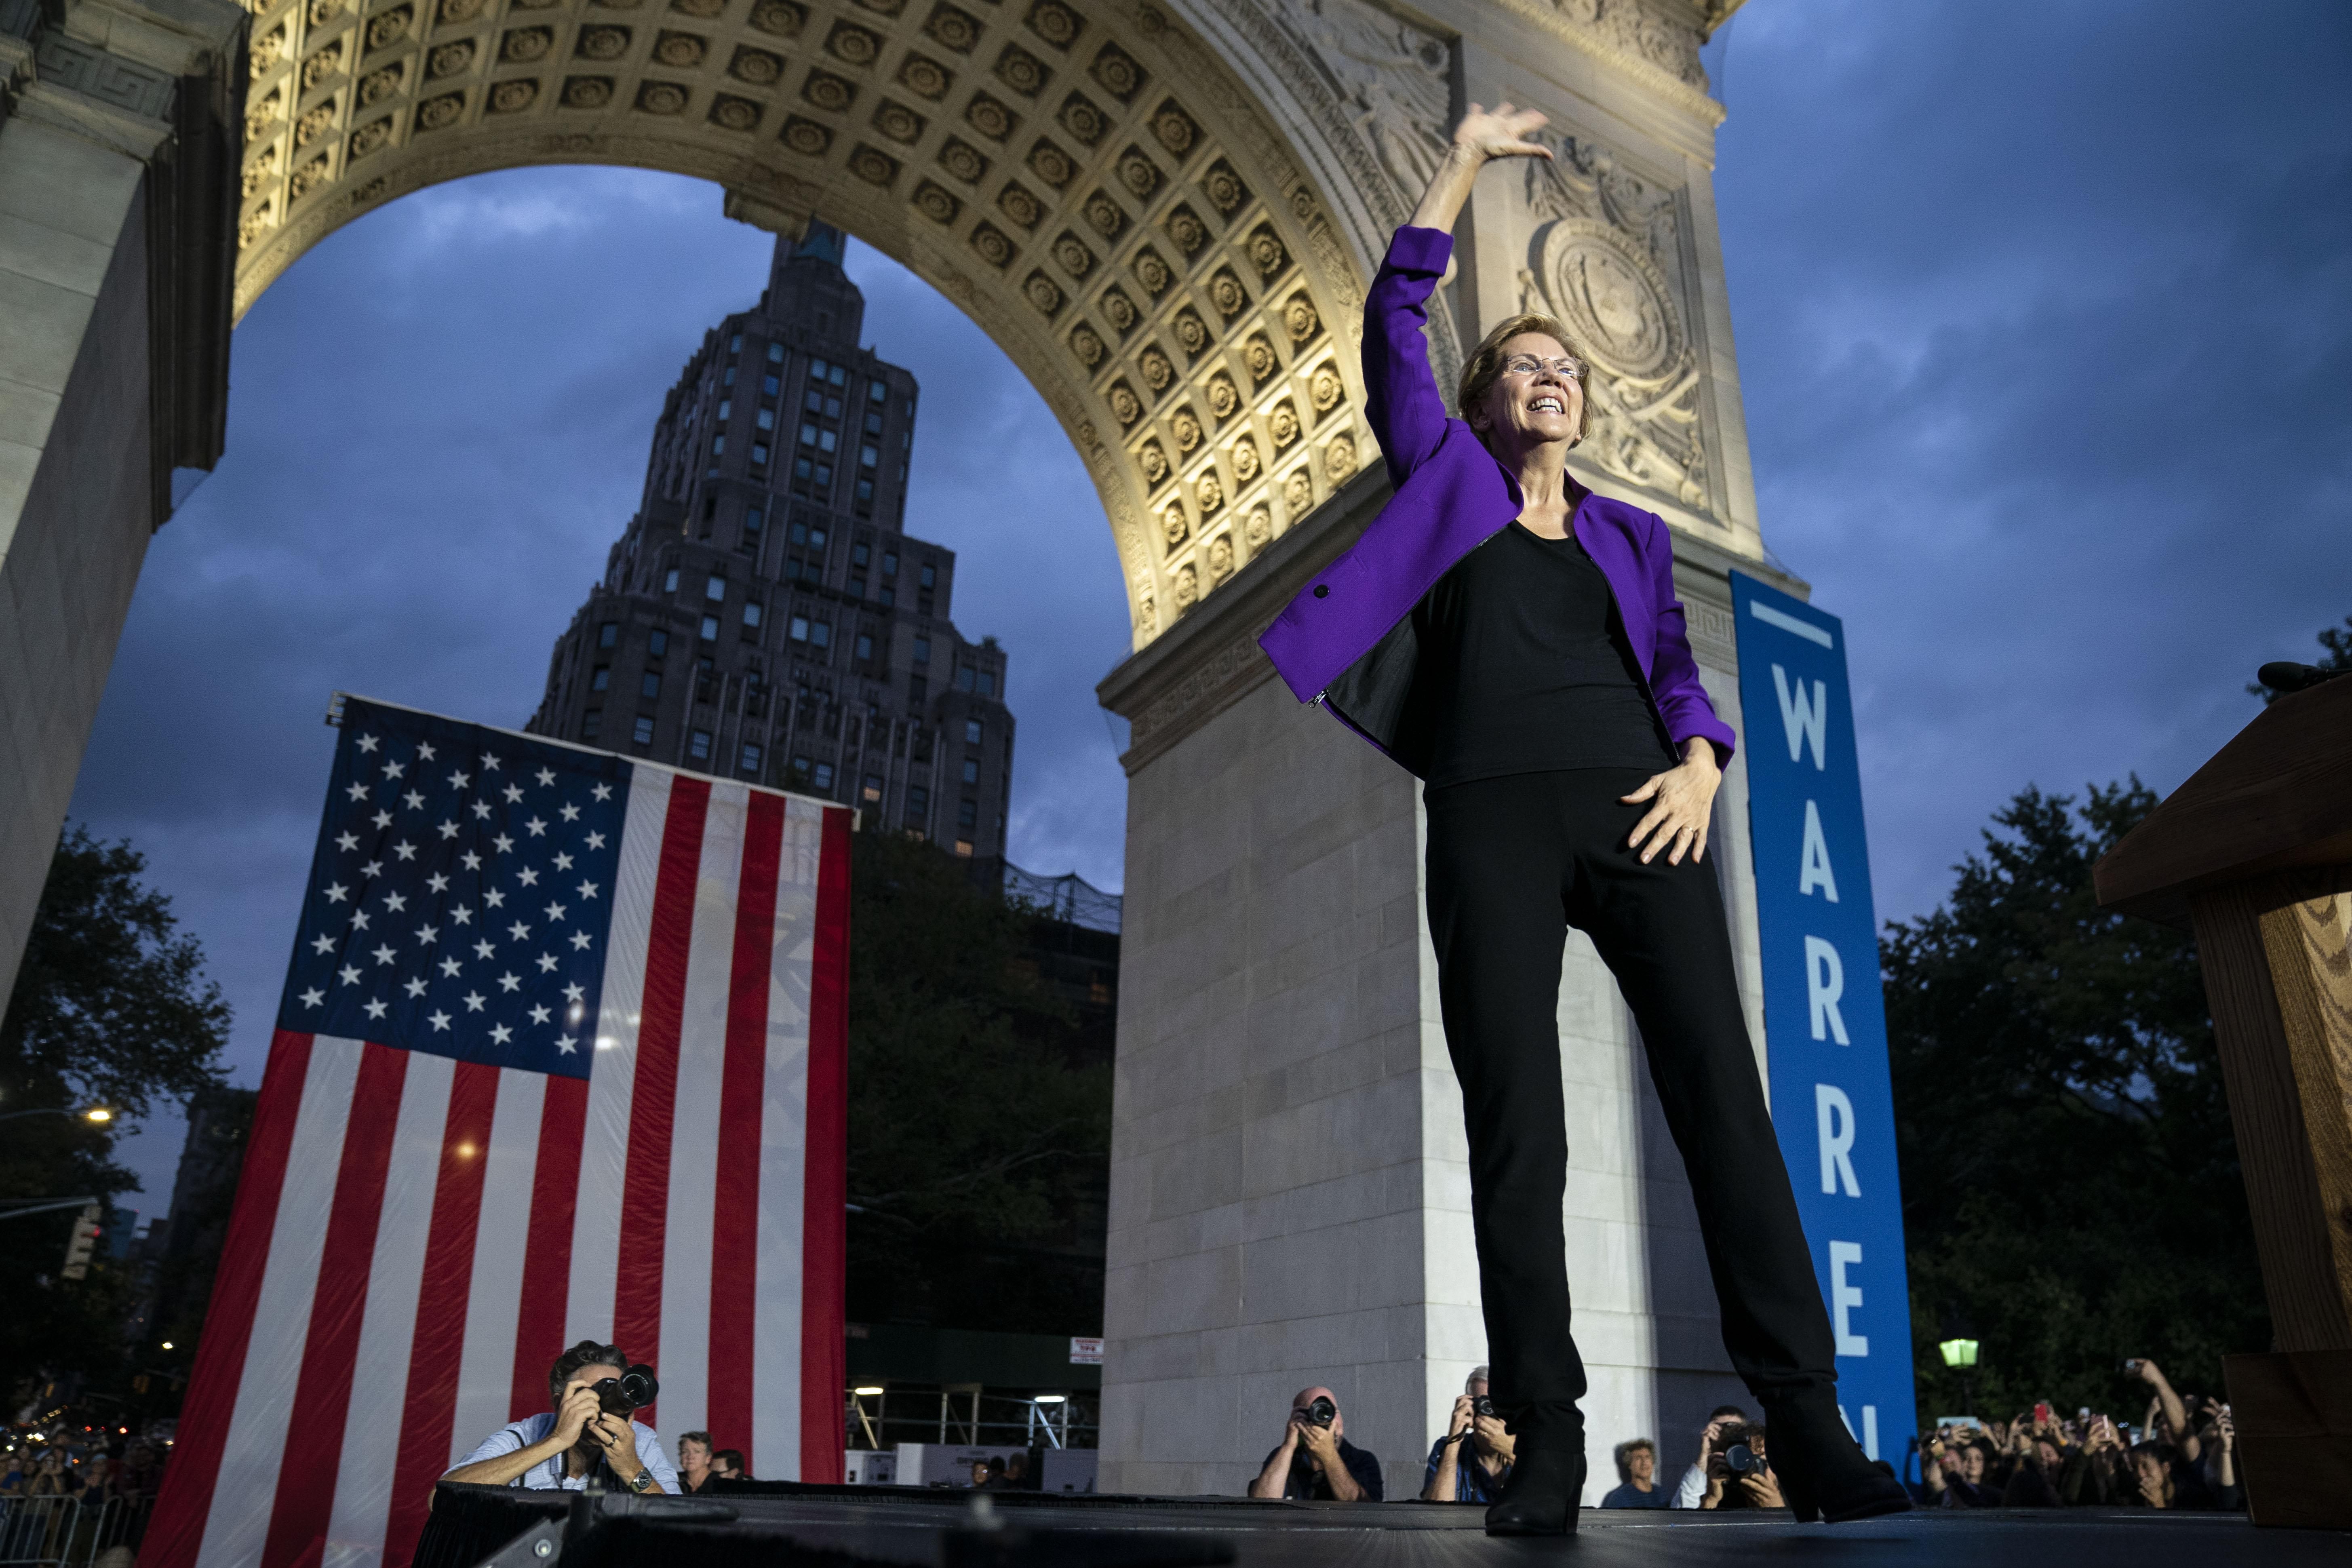 2020 Democratic presidential candidate Sen. Elizabeth Warren (D-MA) arrives for a rally in Washington Square Park on September 16, 2019 in New York City. (Photo by Drew Angerer/Getty Images)